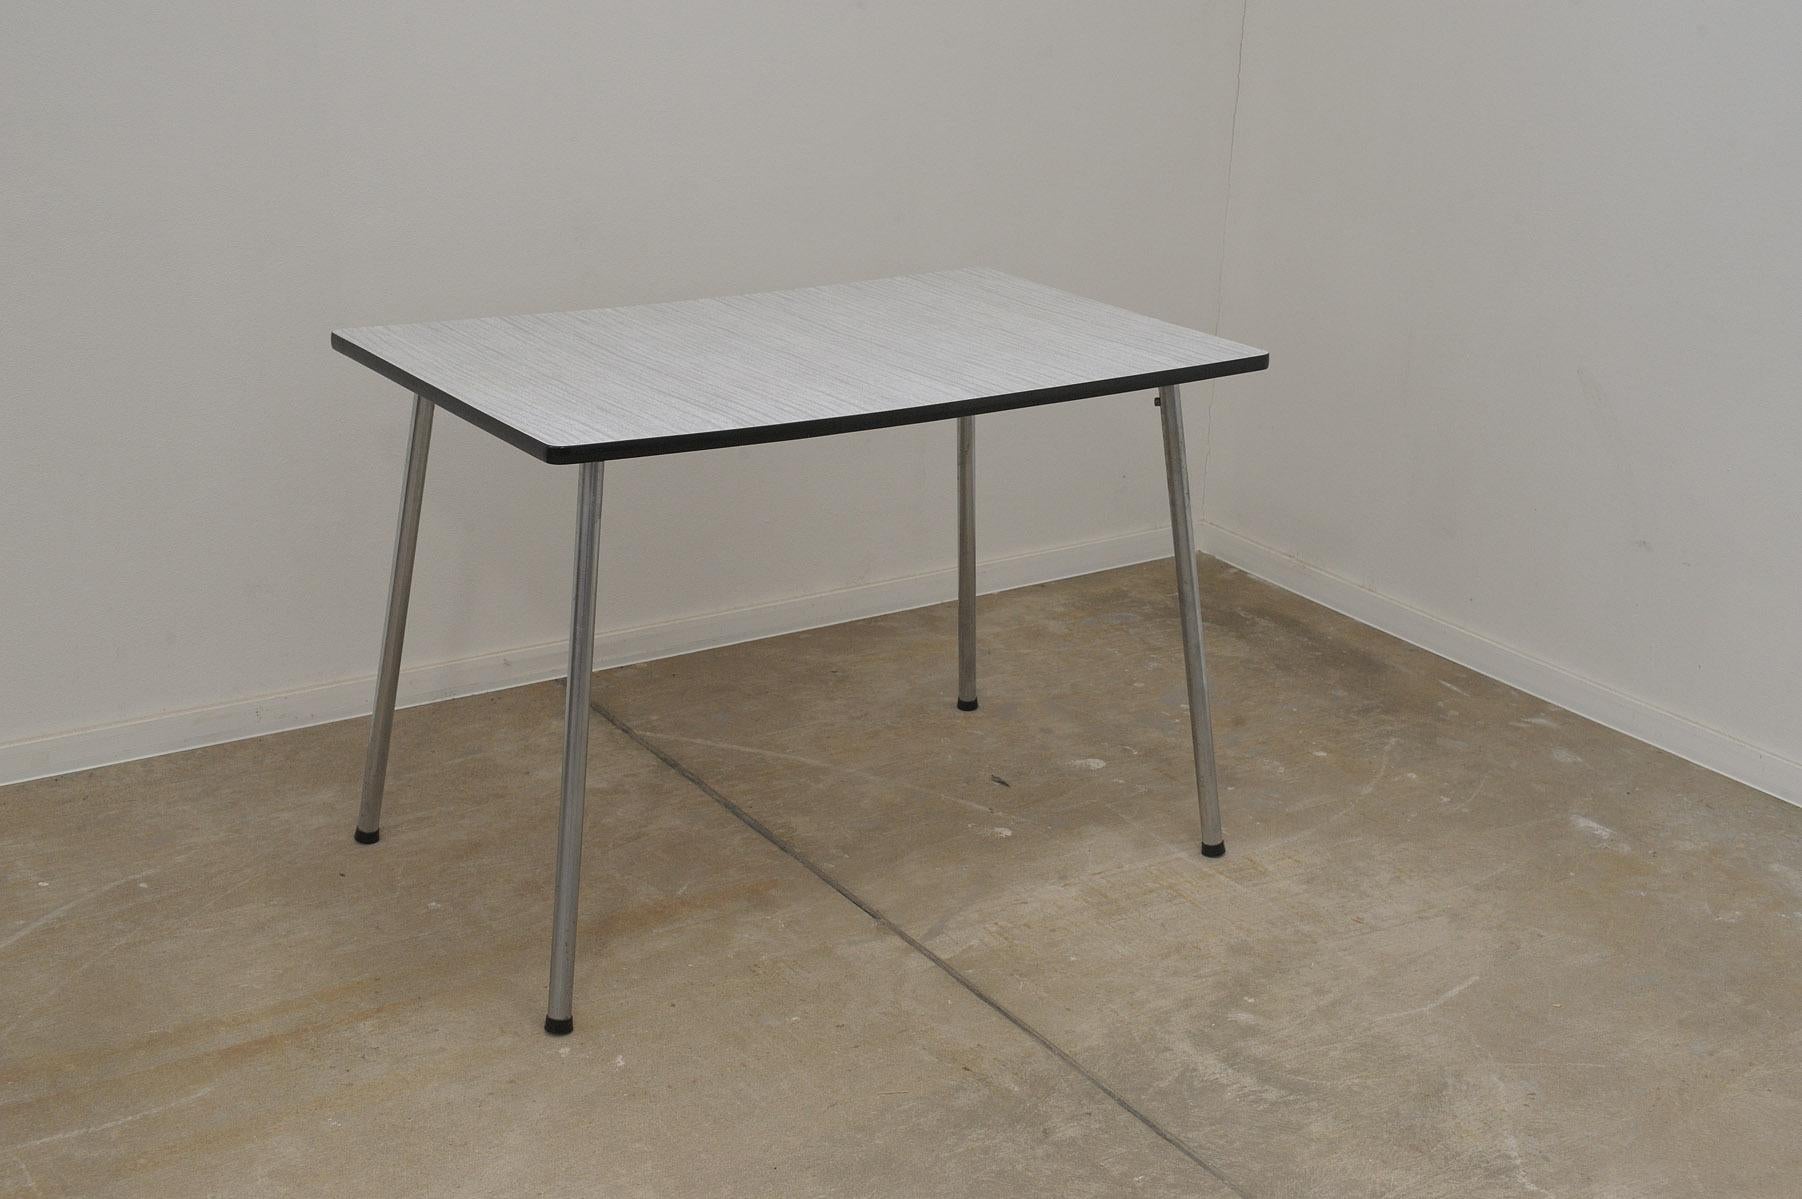 Mid century writing desk or side table, it features a formica surface and chromed legs and one drawer. It was made in Czechoslovakia in the 1960´s.

the table top is lined with a black plastic strip.

The table is in original functioning condition,